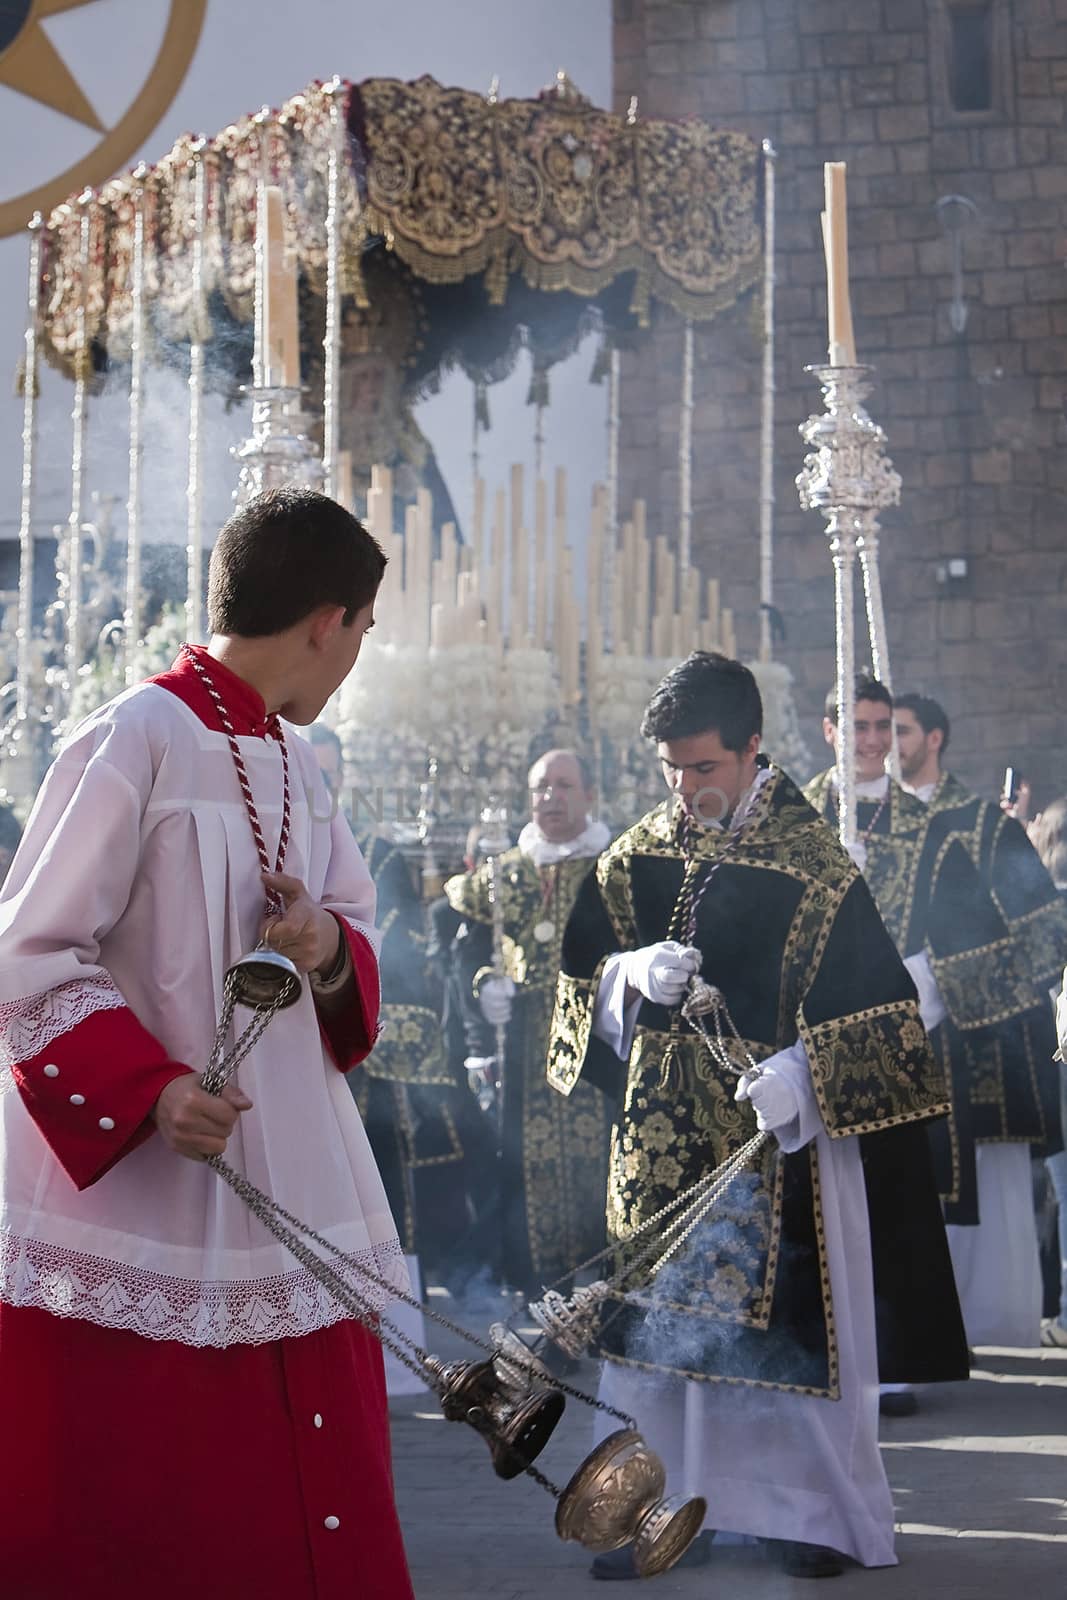 Young people in procession with incense burners in Holy week, Spain